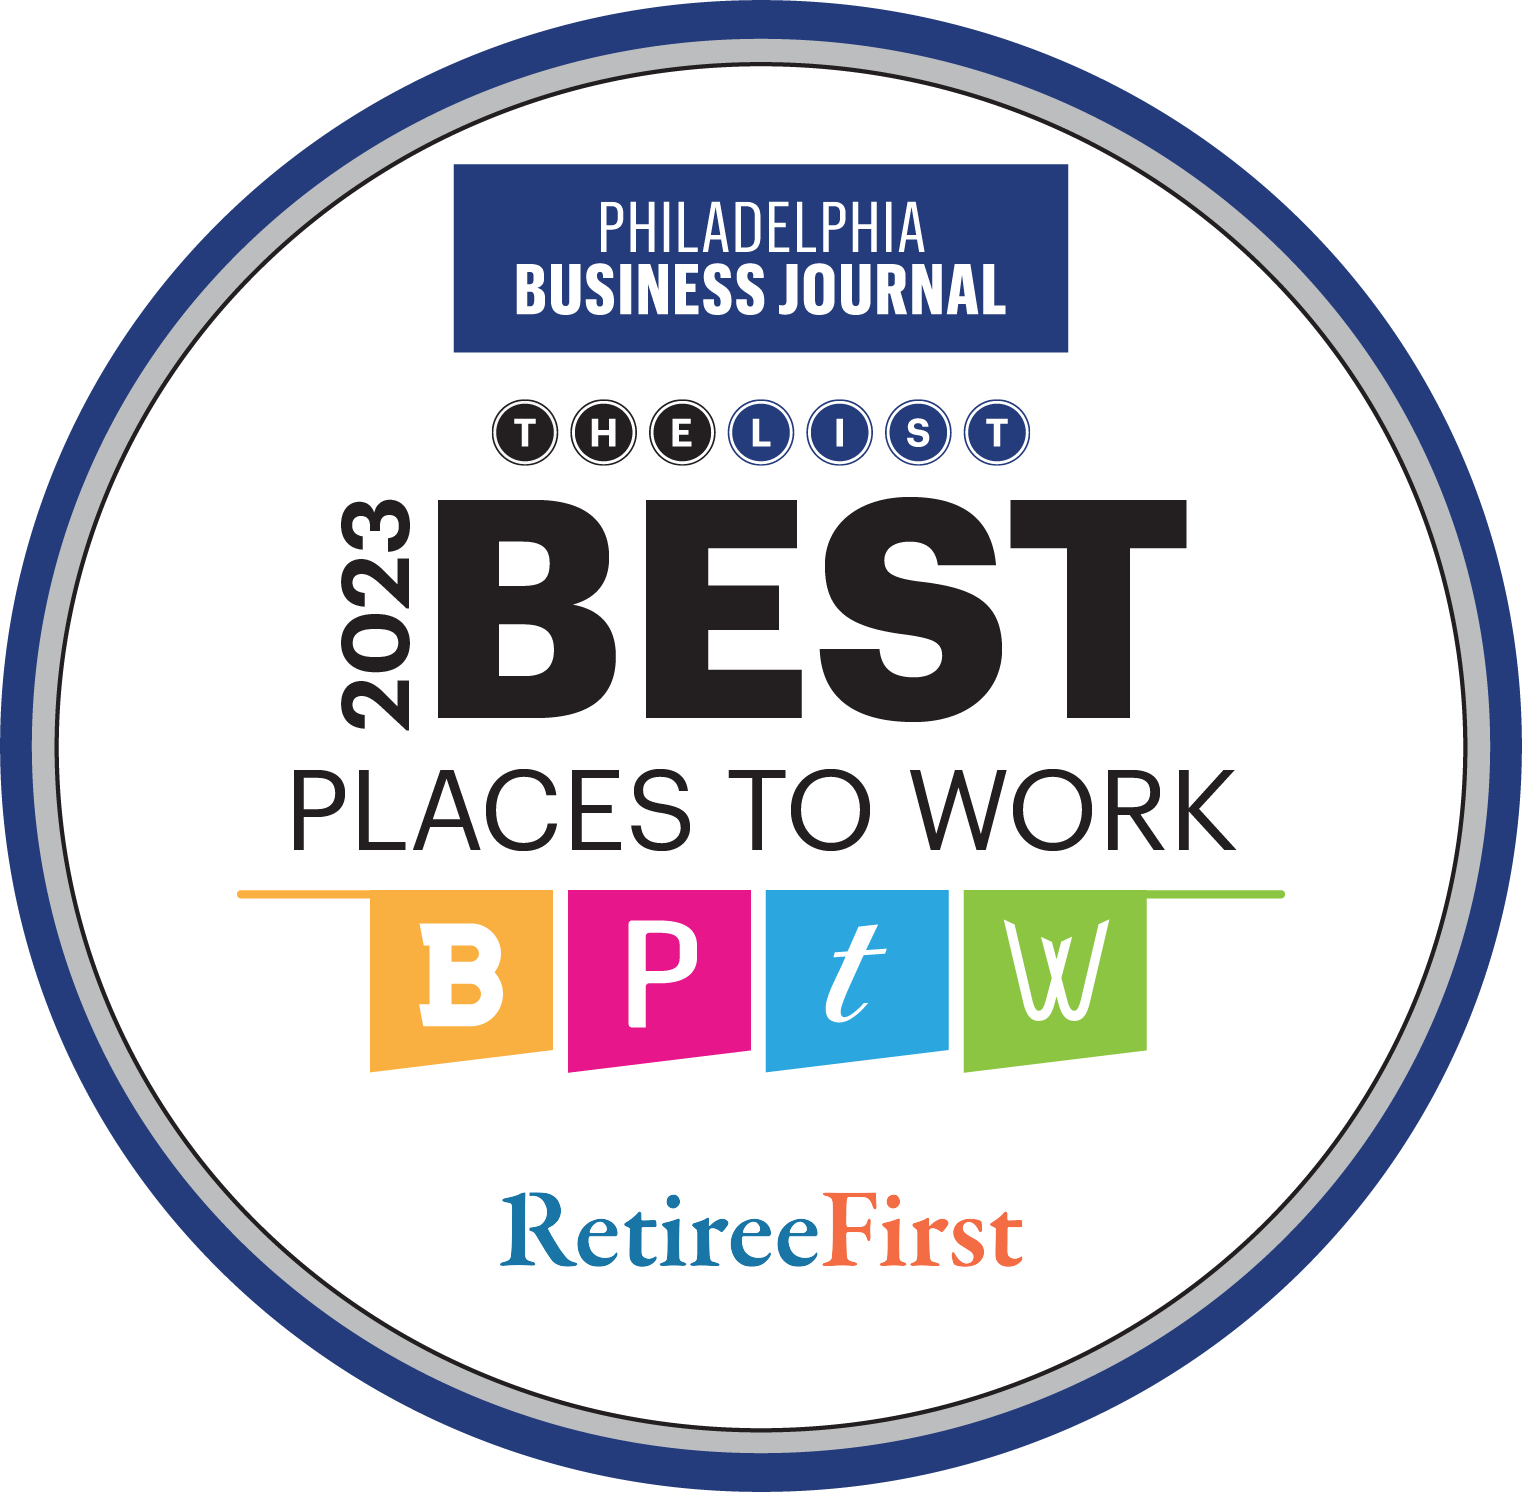 Philadelphia Business Journal 2023 Bets Places to Work Badge